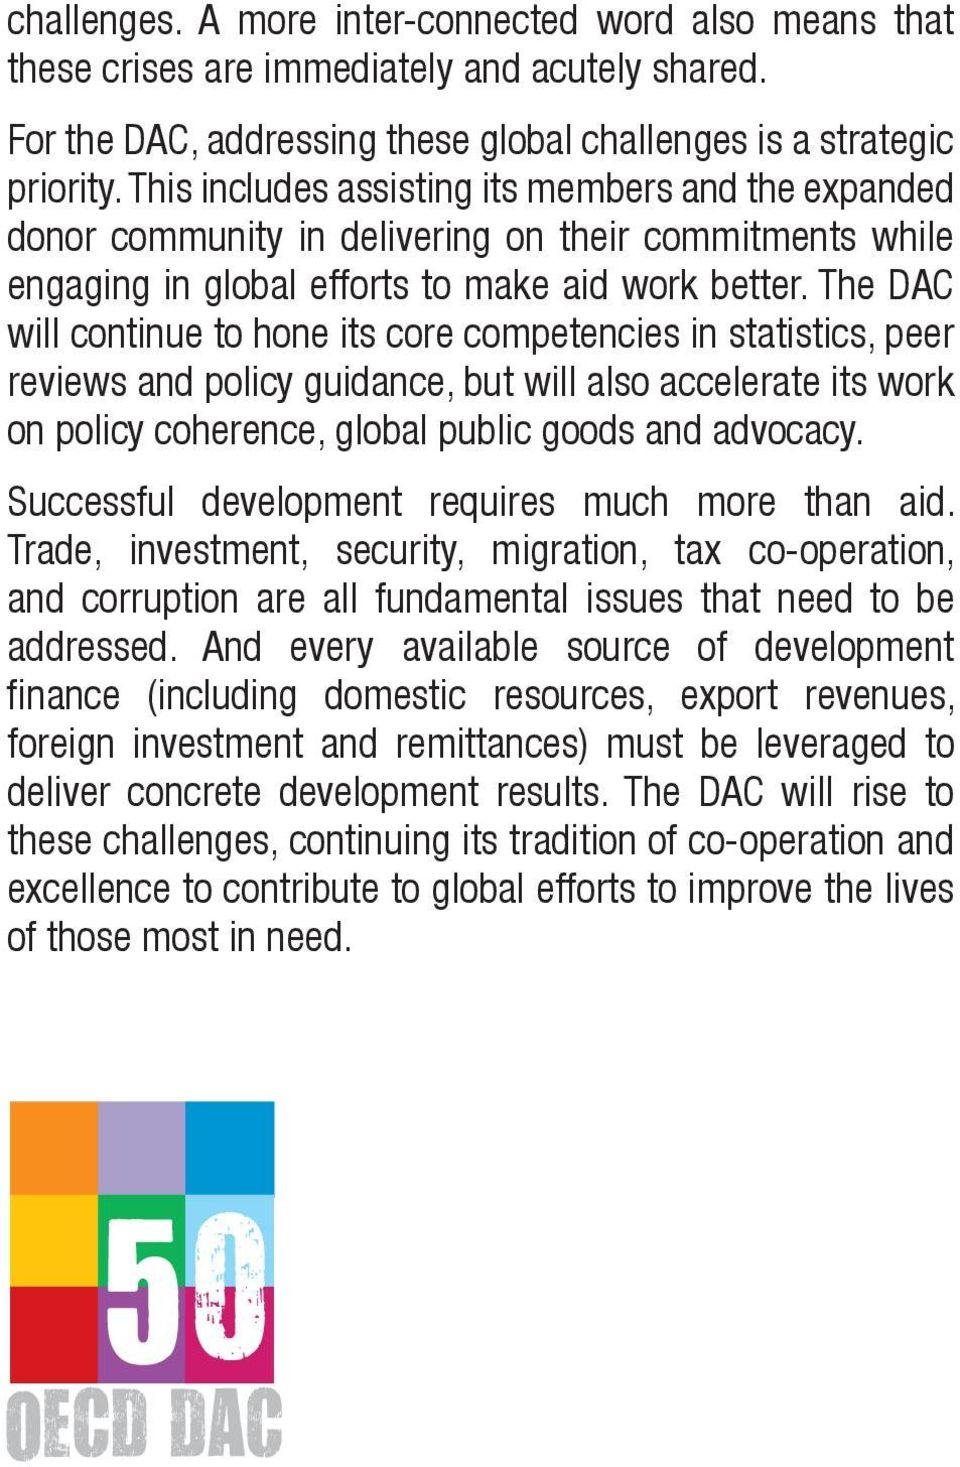 The DAC will continue to hone its core competencies in statistics, peer reviews and policy guidance, but will also accelerate its work on policy coherence, global public goods and advocacy.